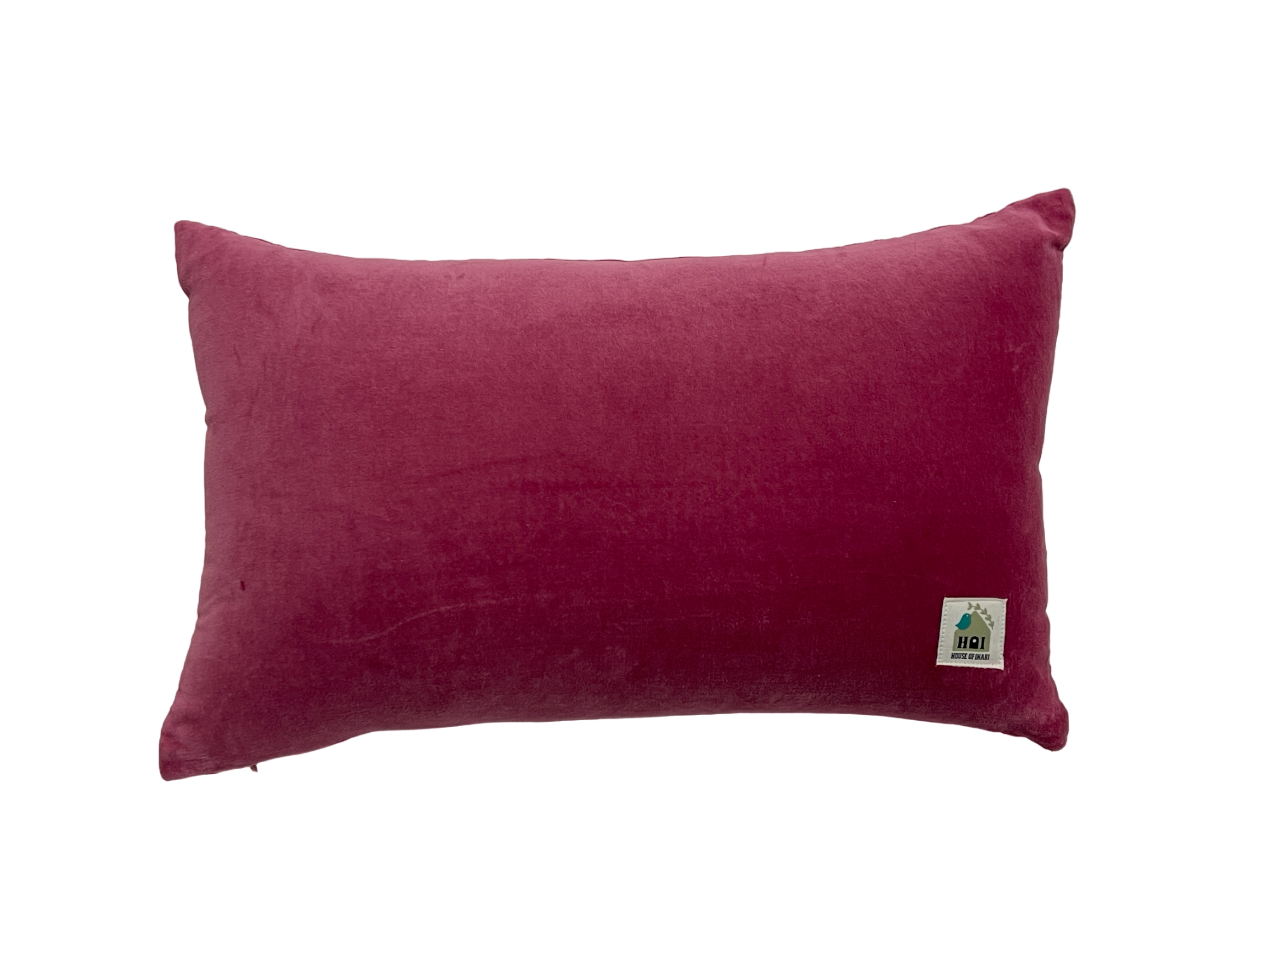 Wild Luxury Velvet Embroidered Old Rose Cushion Cover